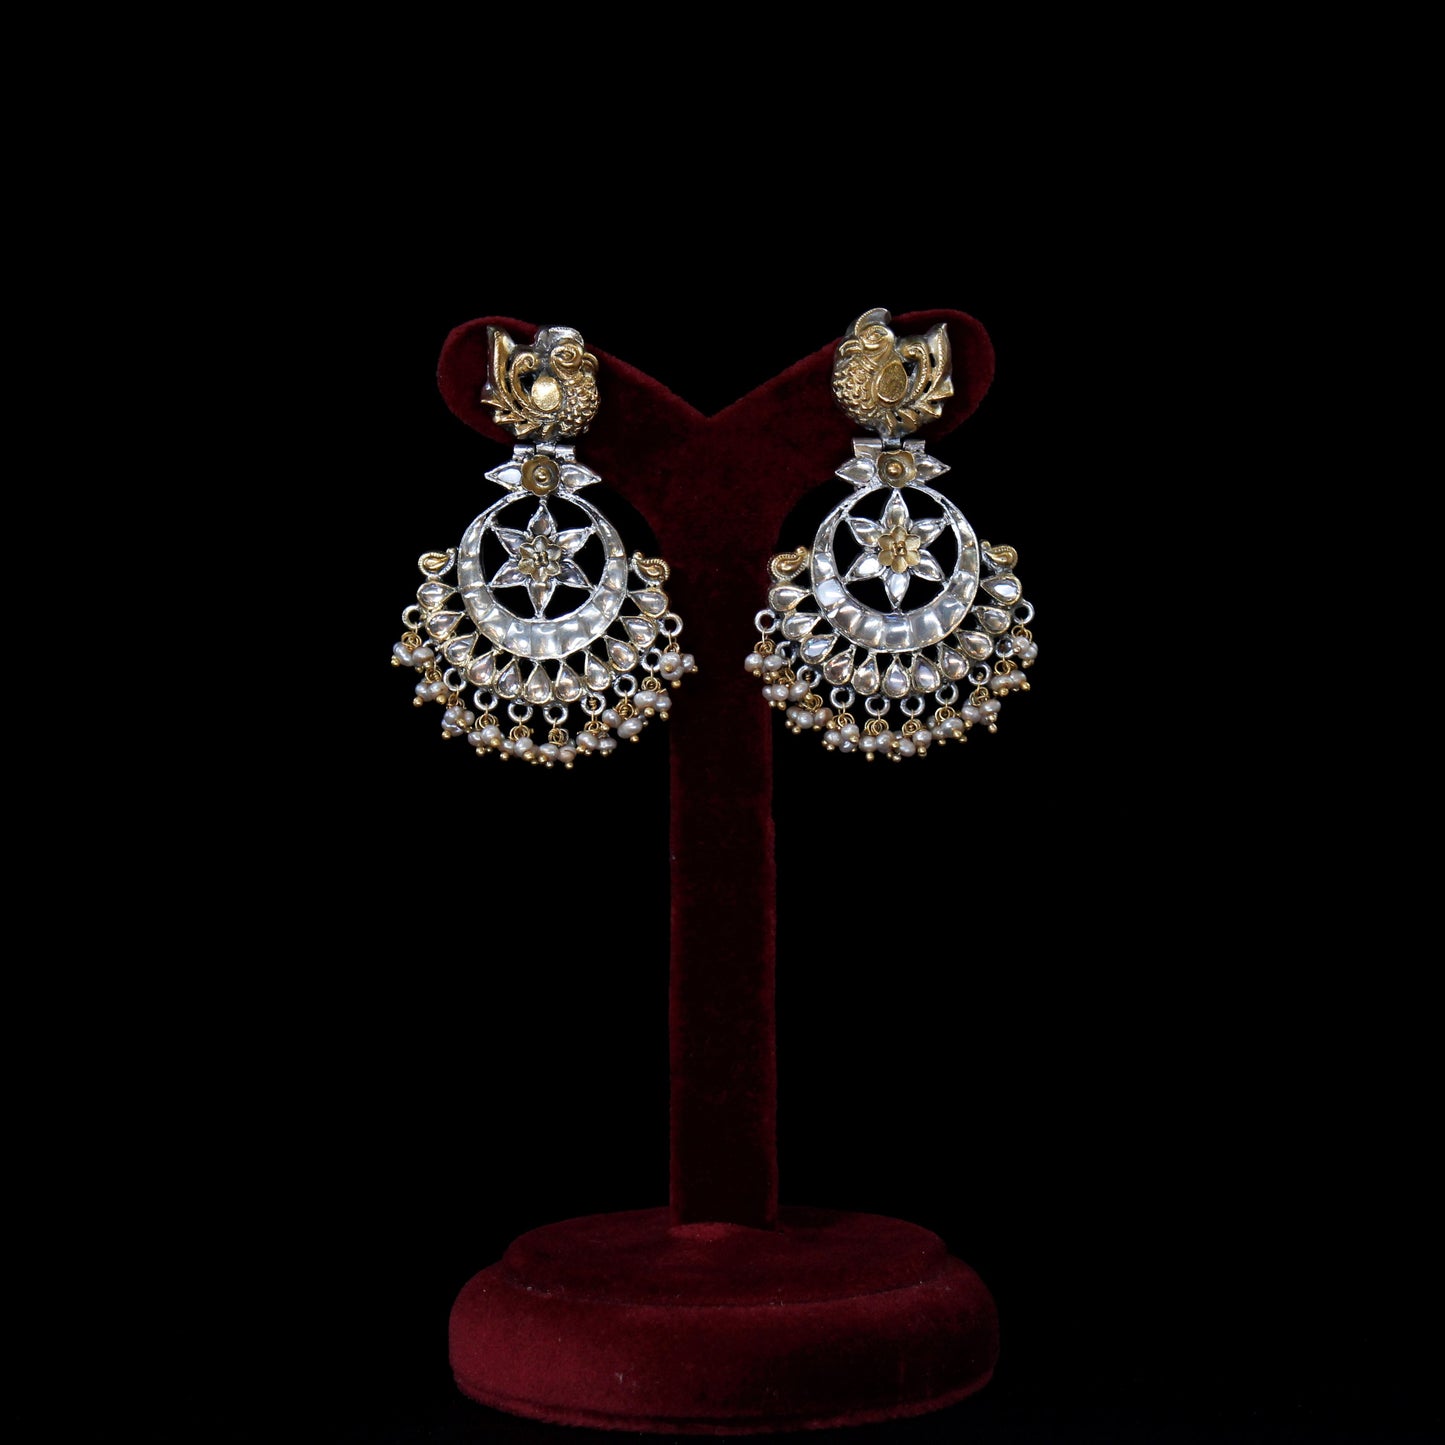 TWO-toned EARRINGS:- 92.5 STERLING SILVER WITH KUNDAN & FRESH WATER PEARLS.